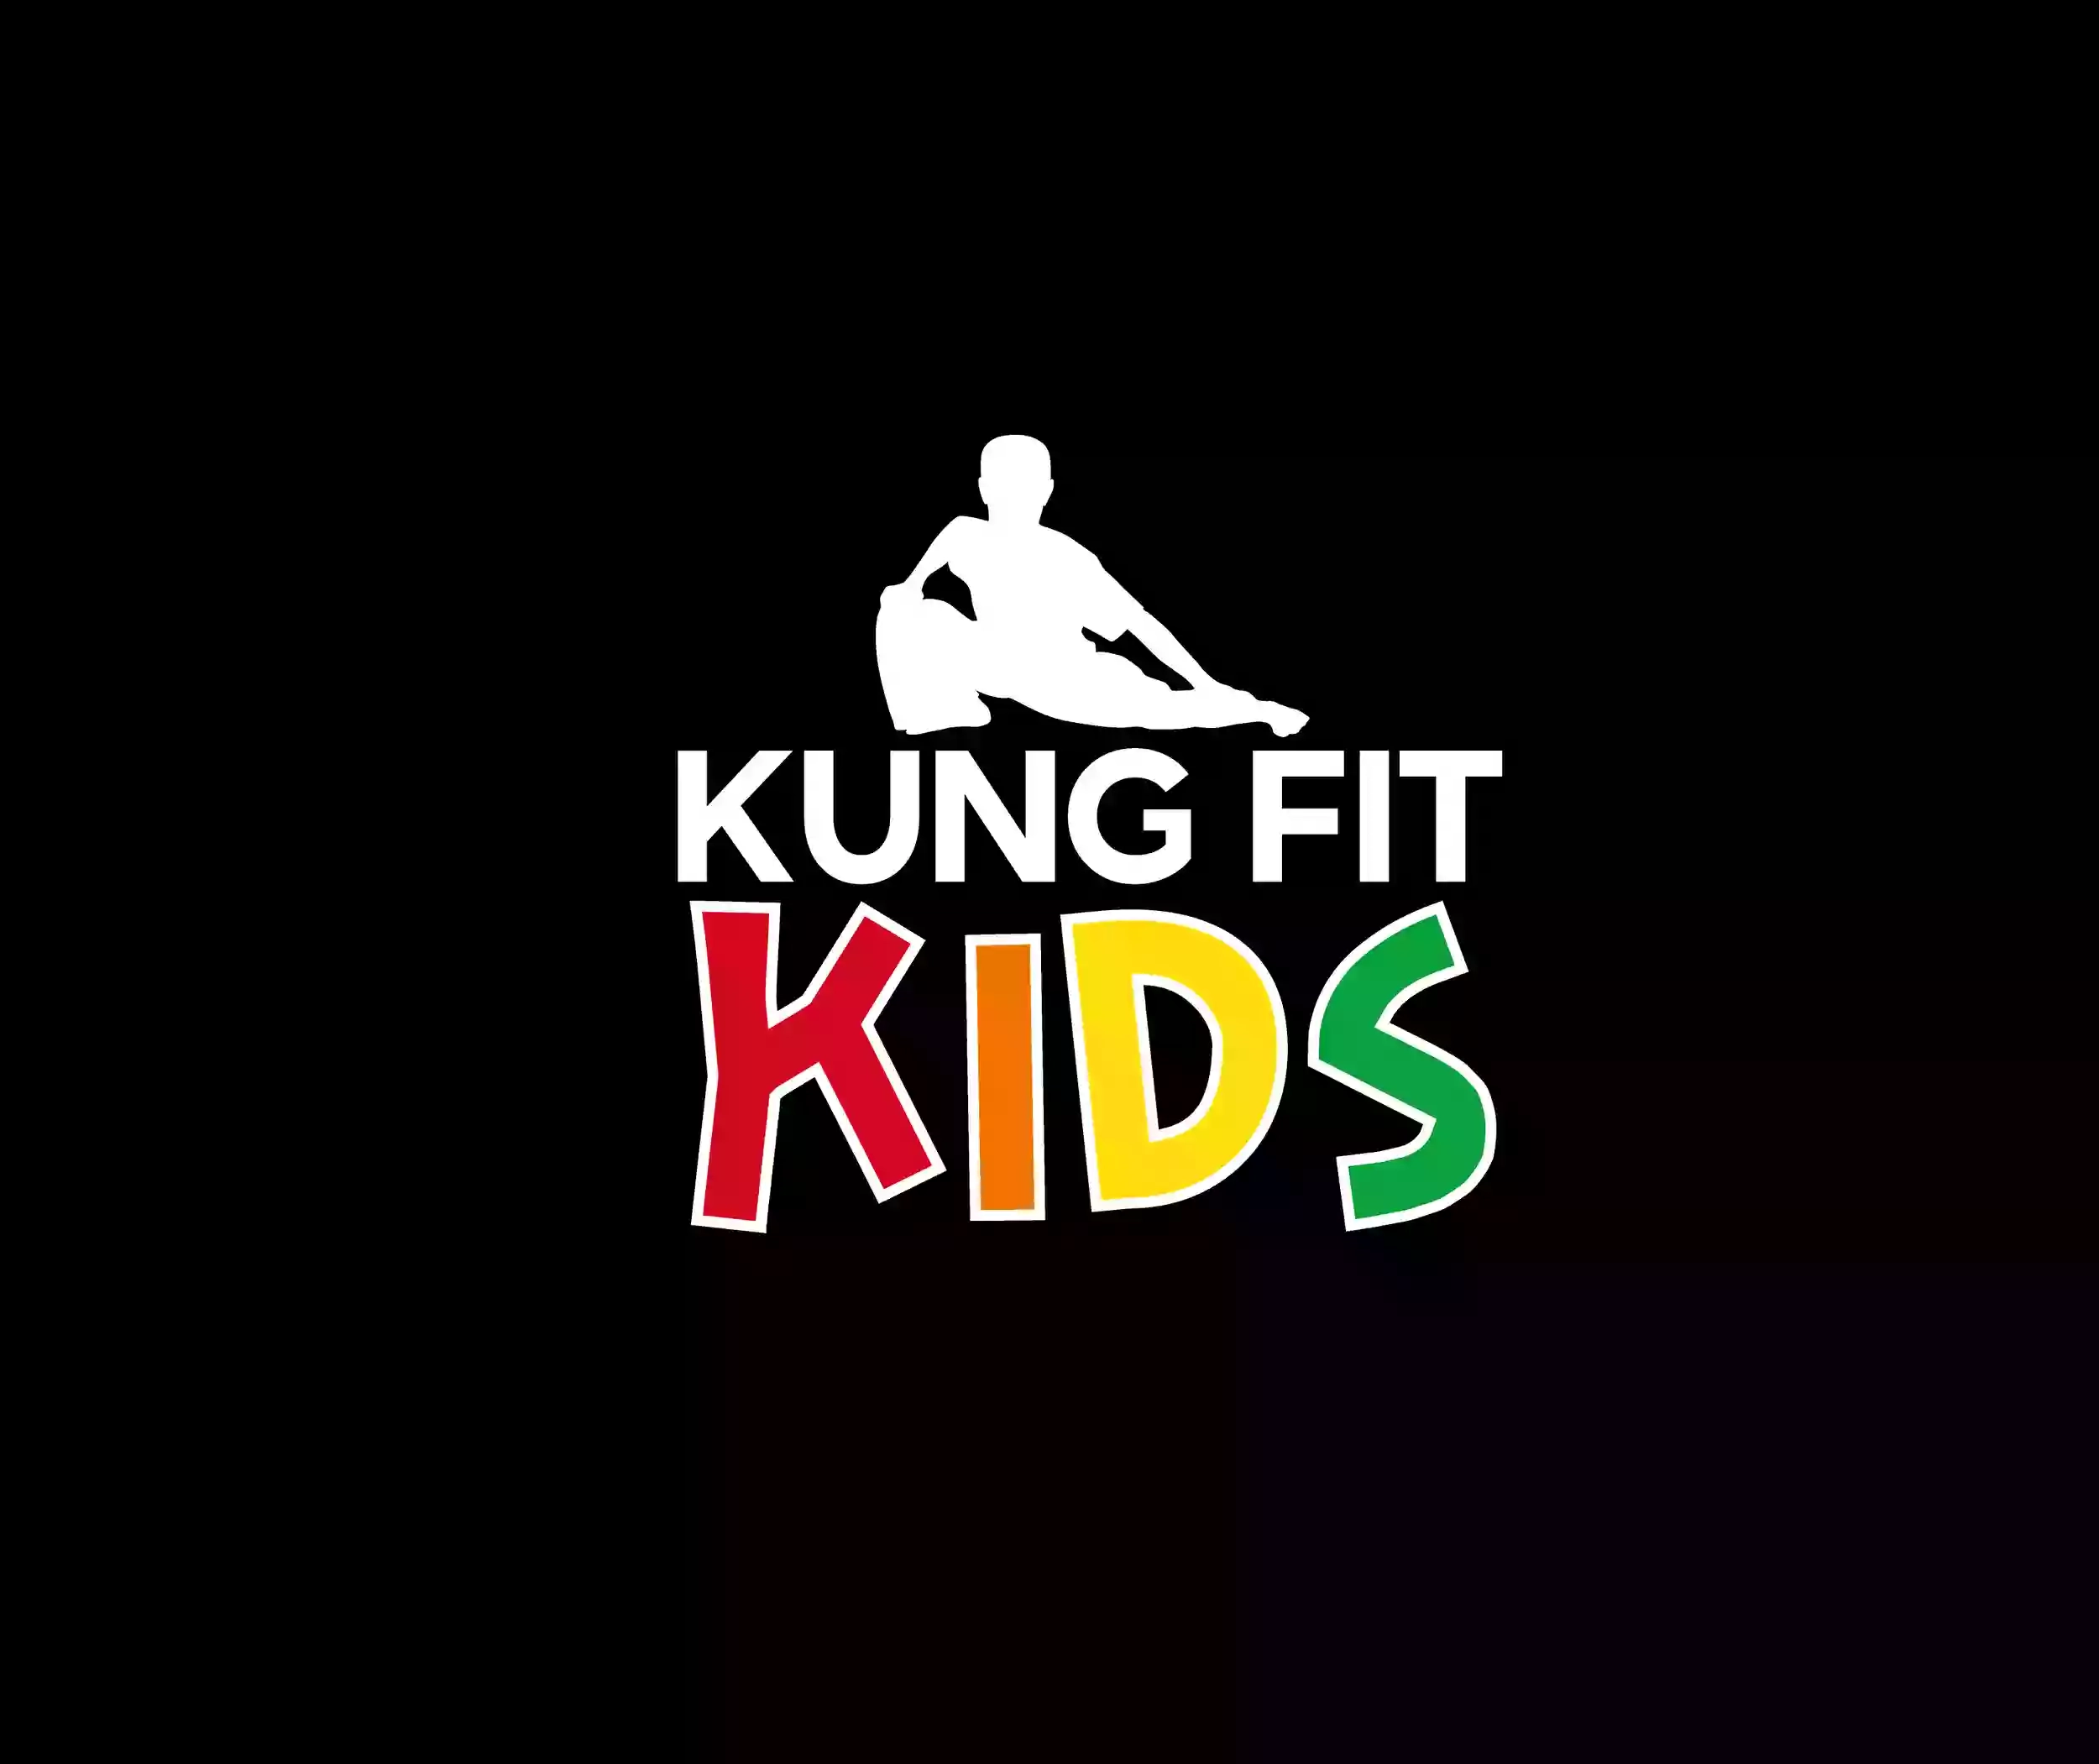 Kung Fit Kids